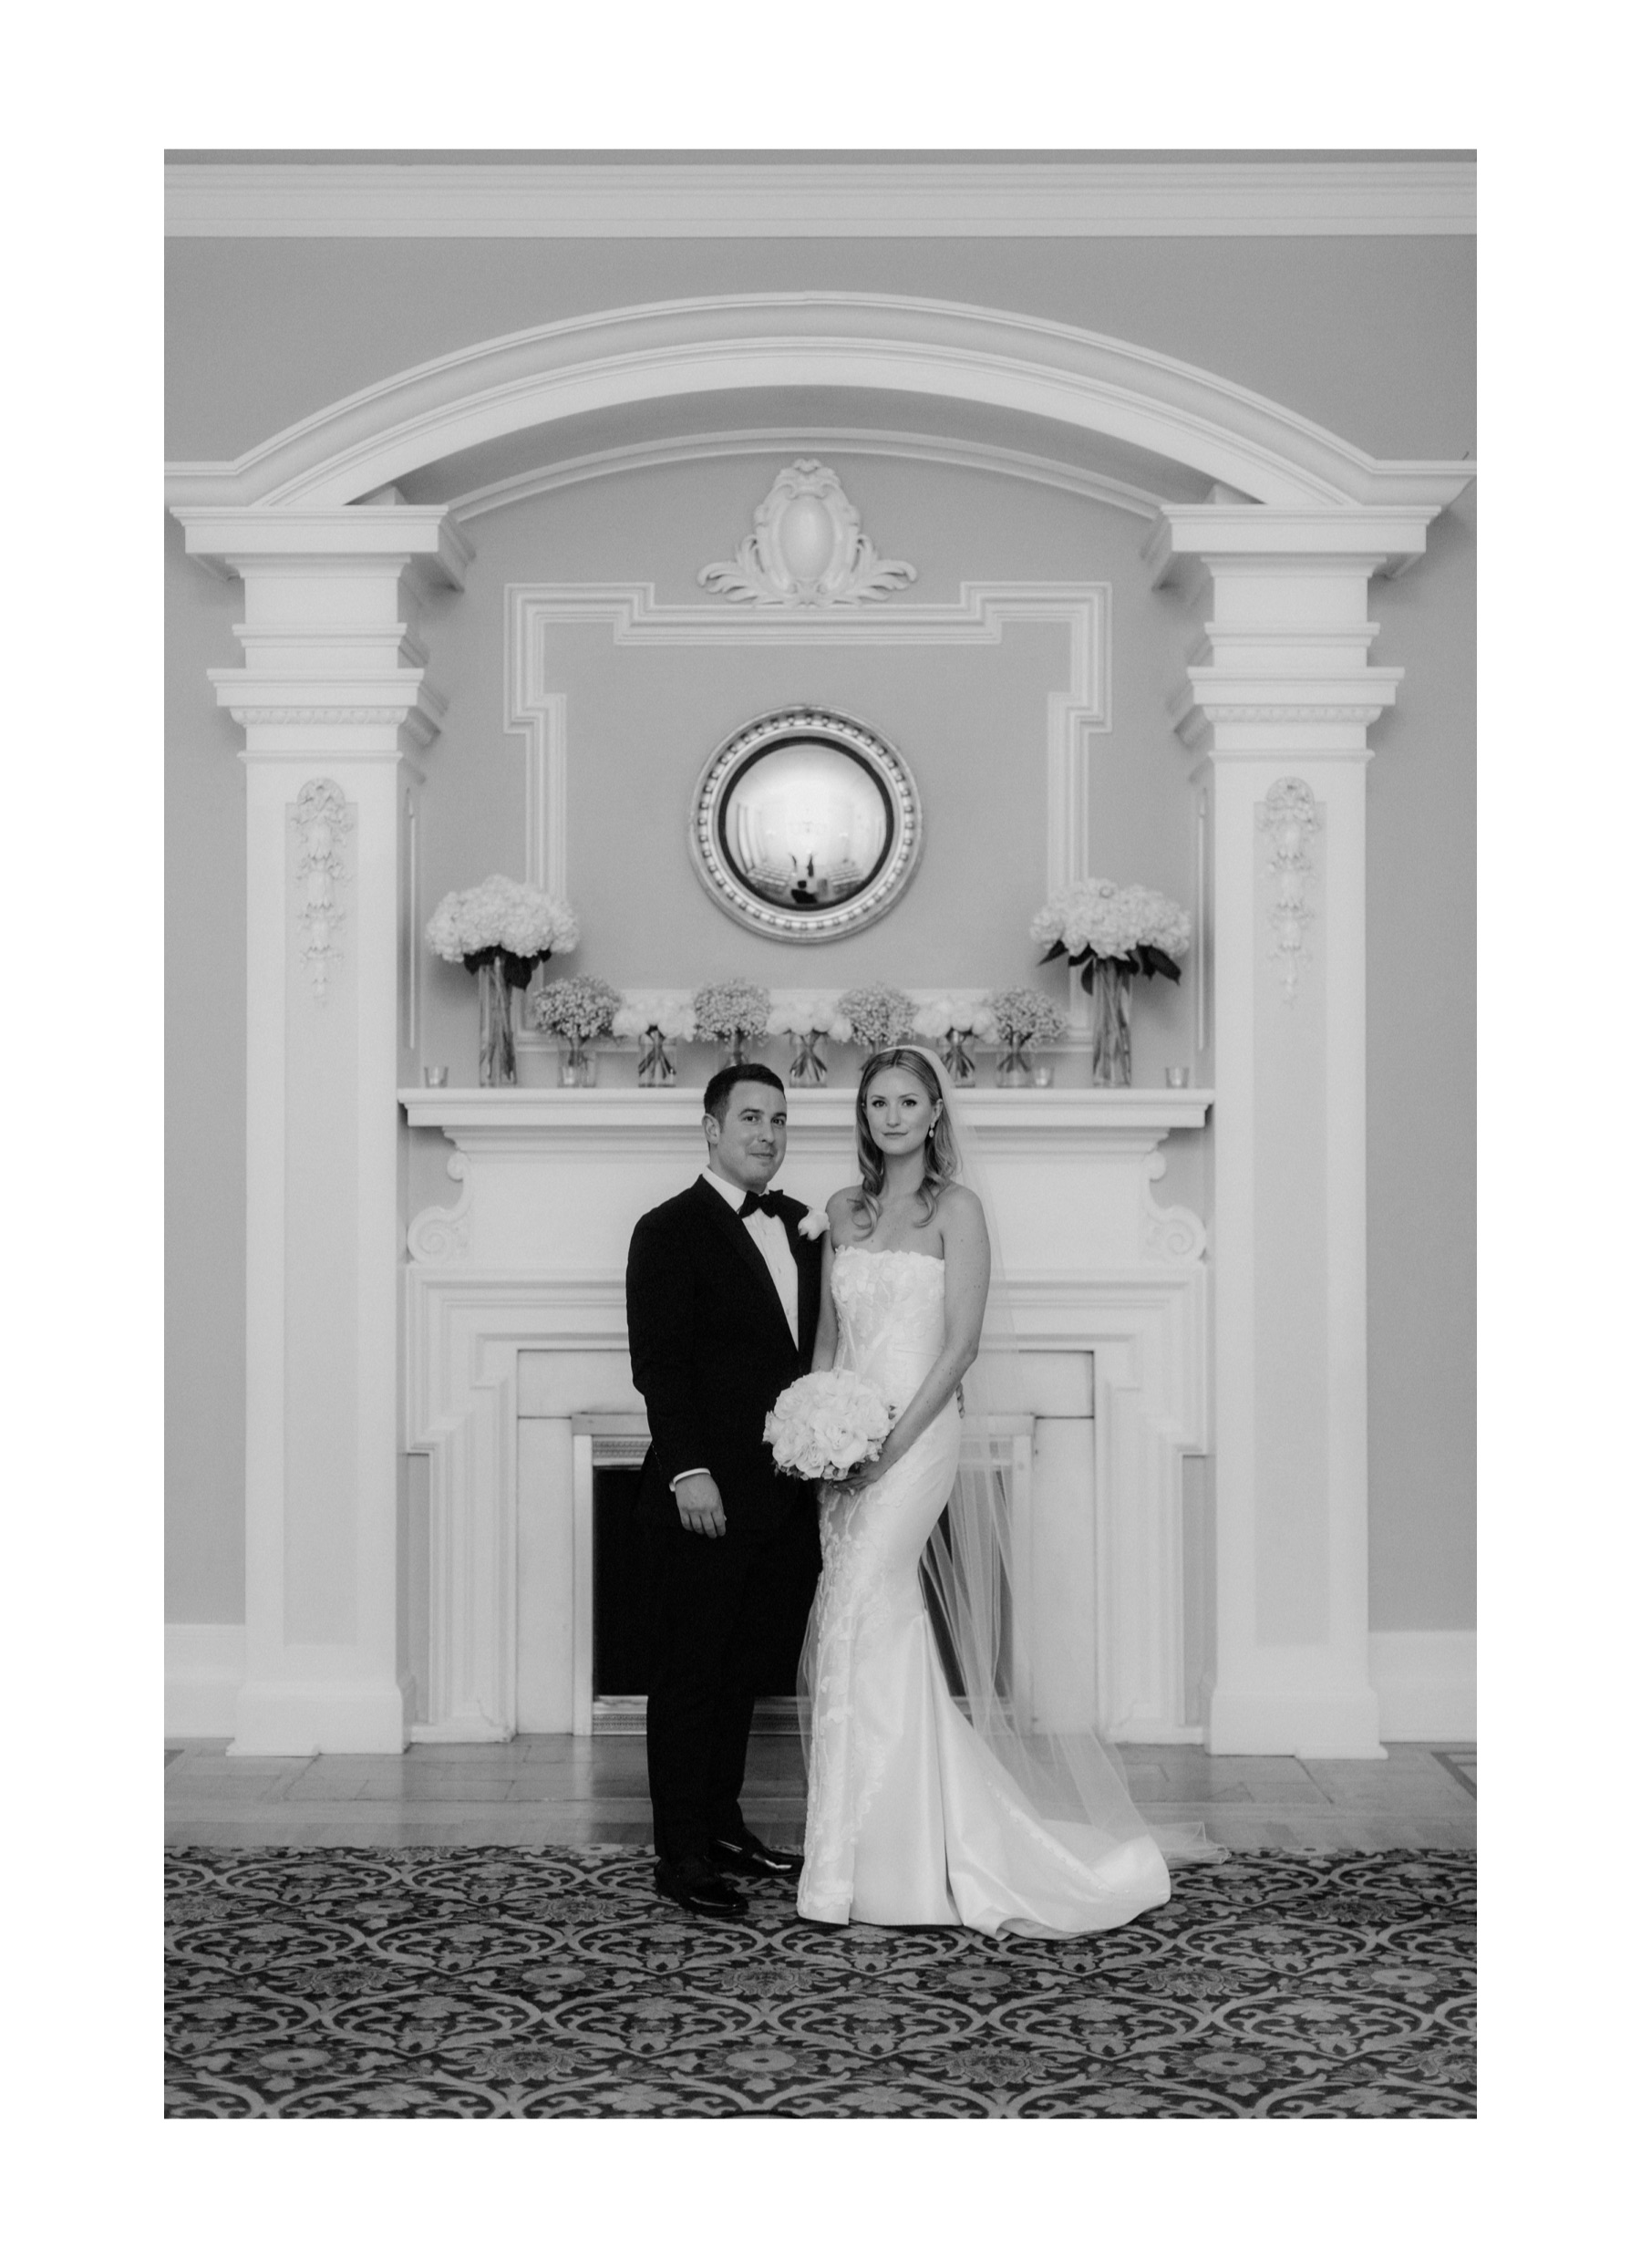 Traditional and timeless wedding portraiture at the Vancouver Club